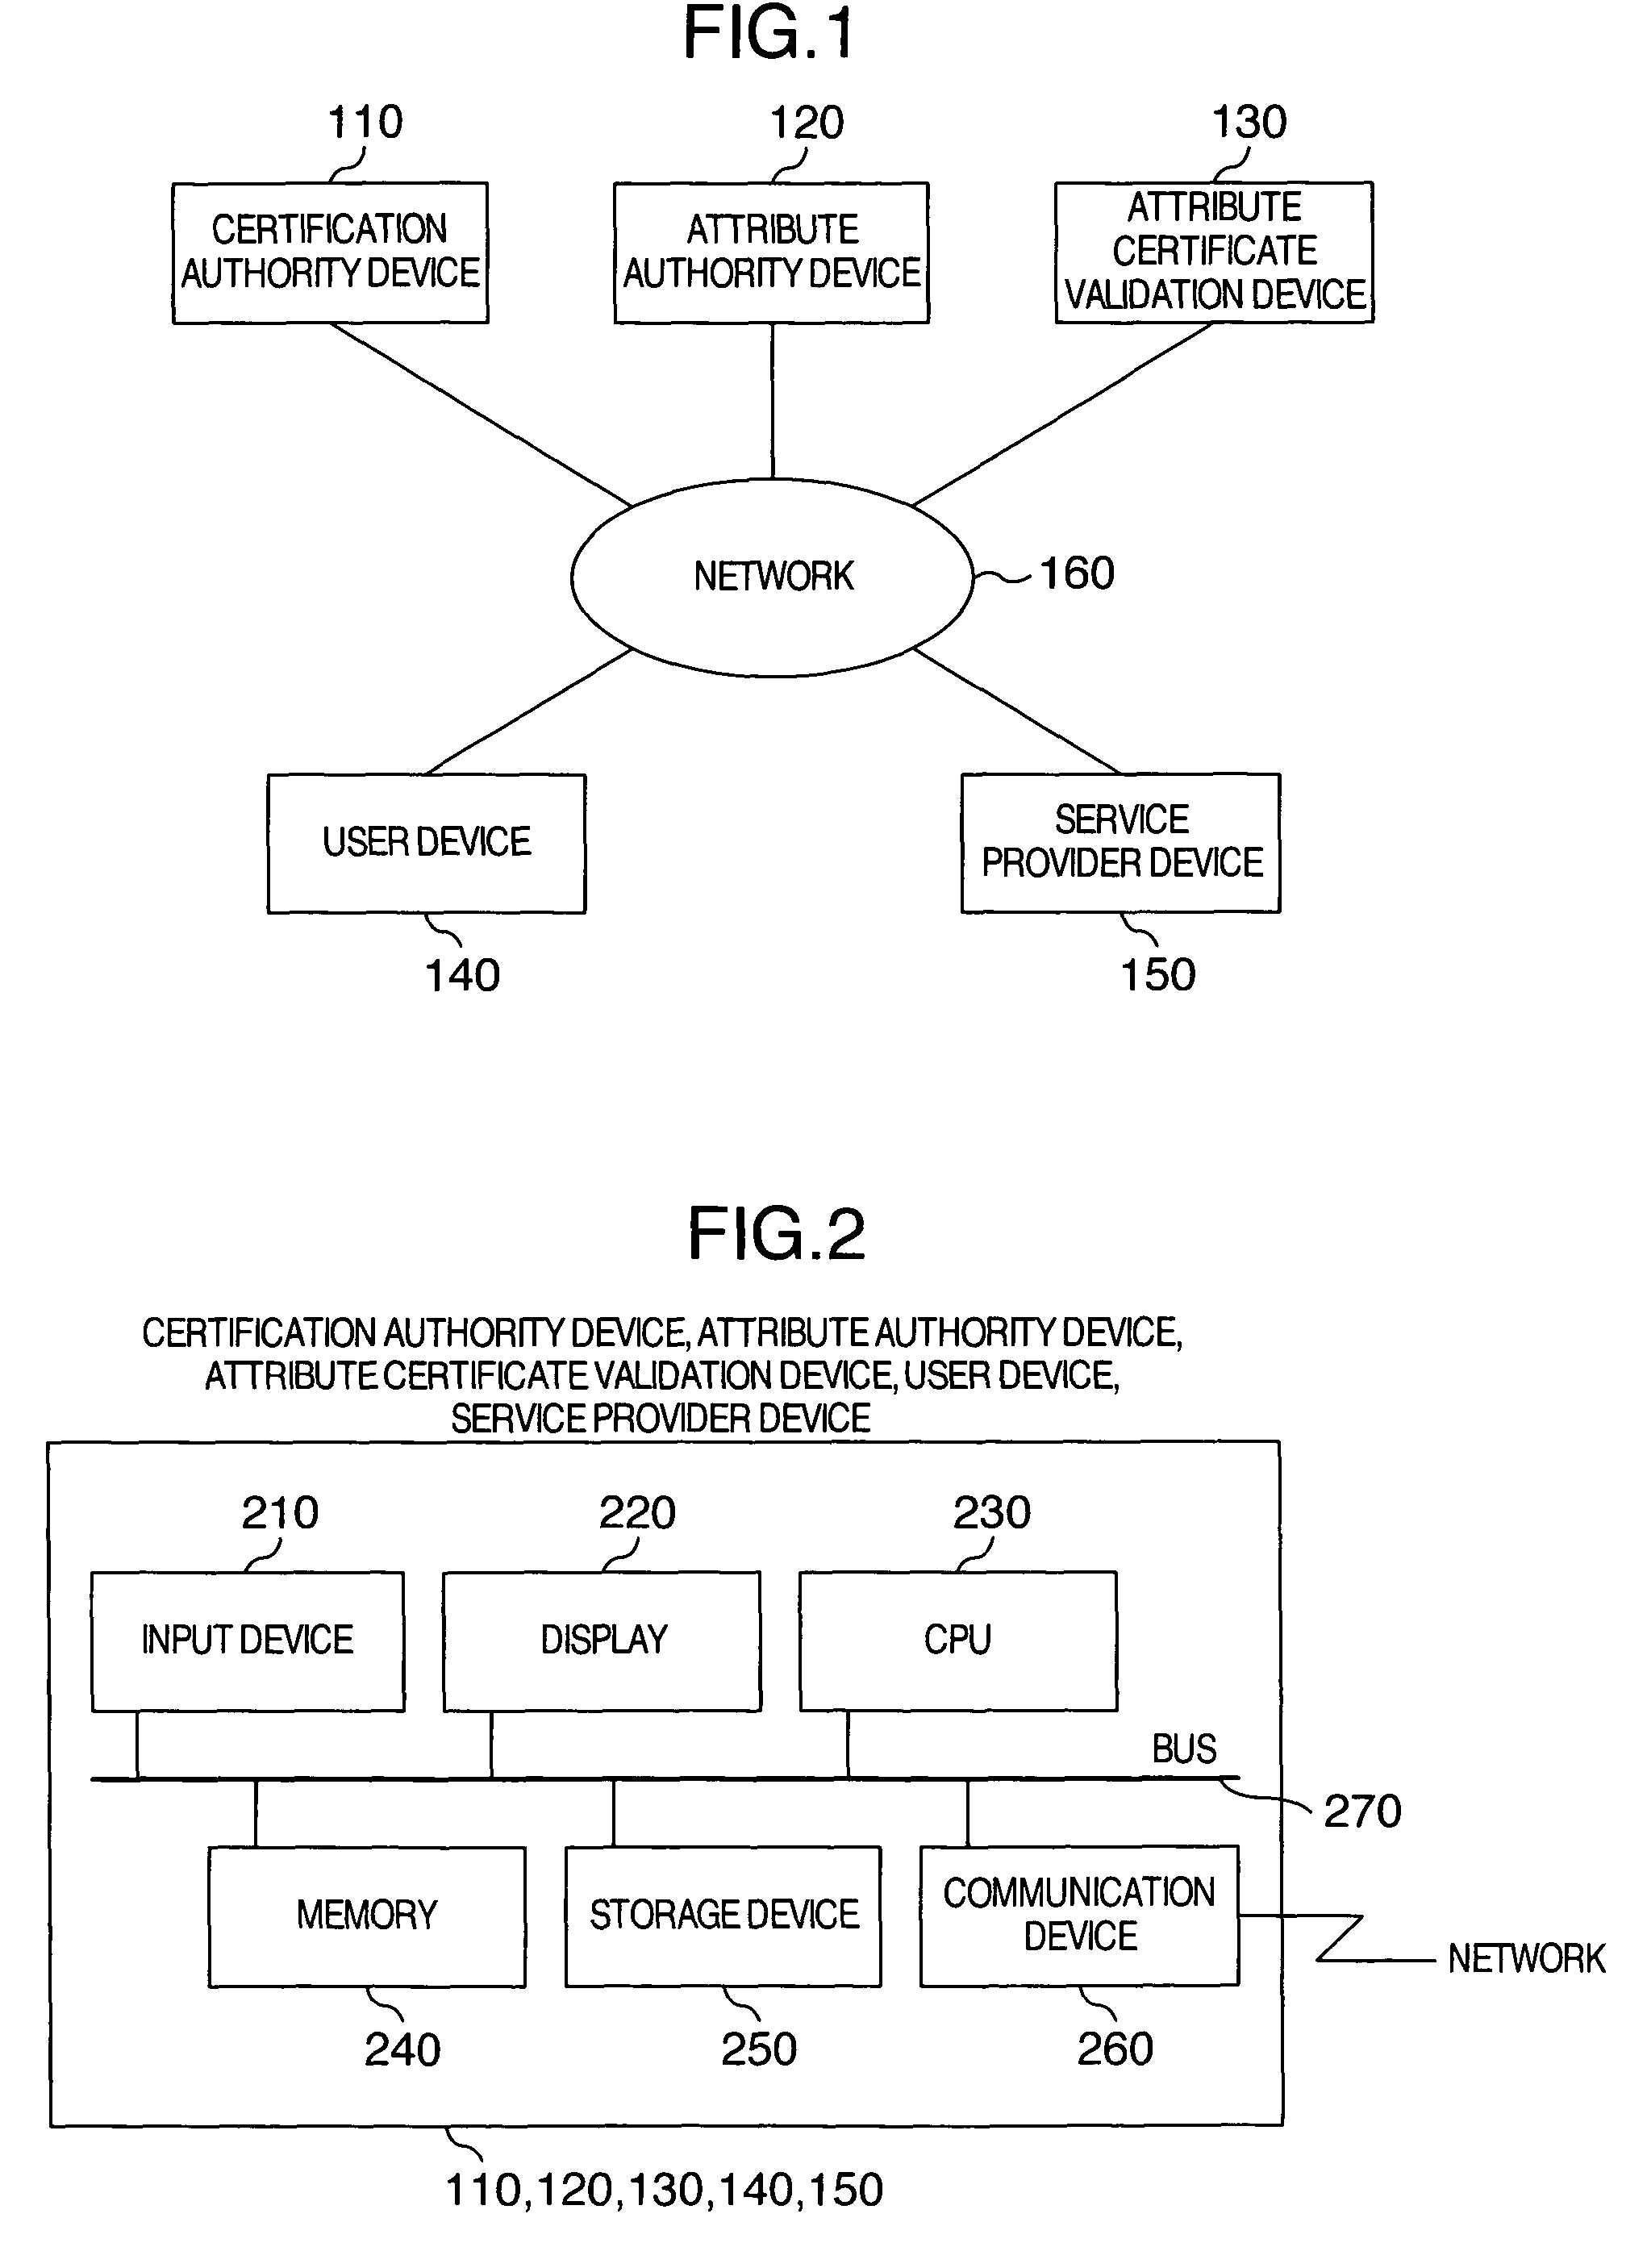 Attribute certificate validation method and device